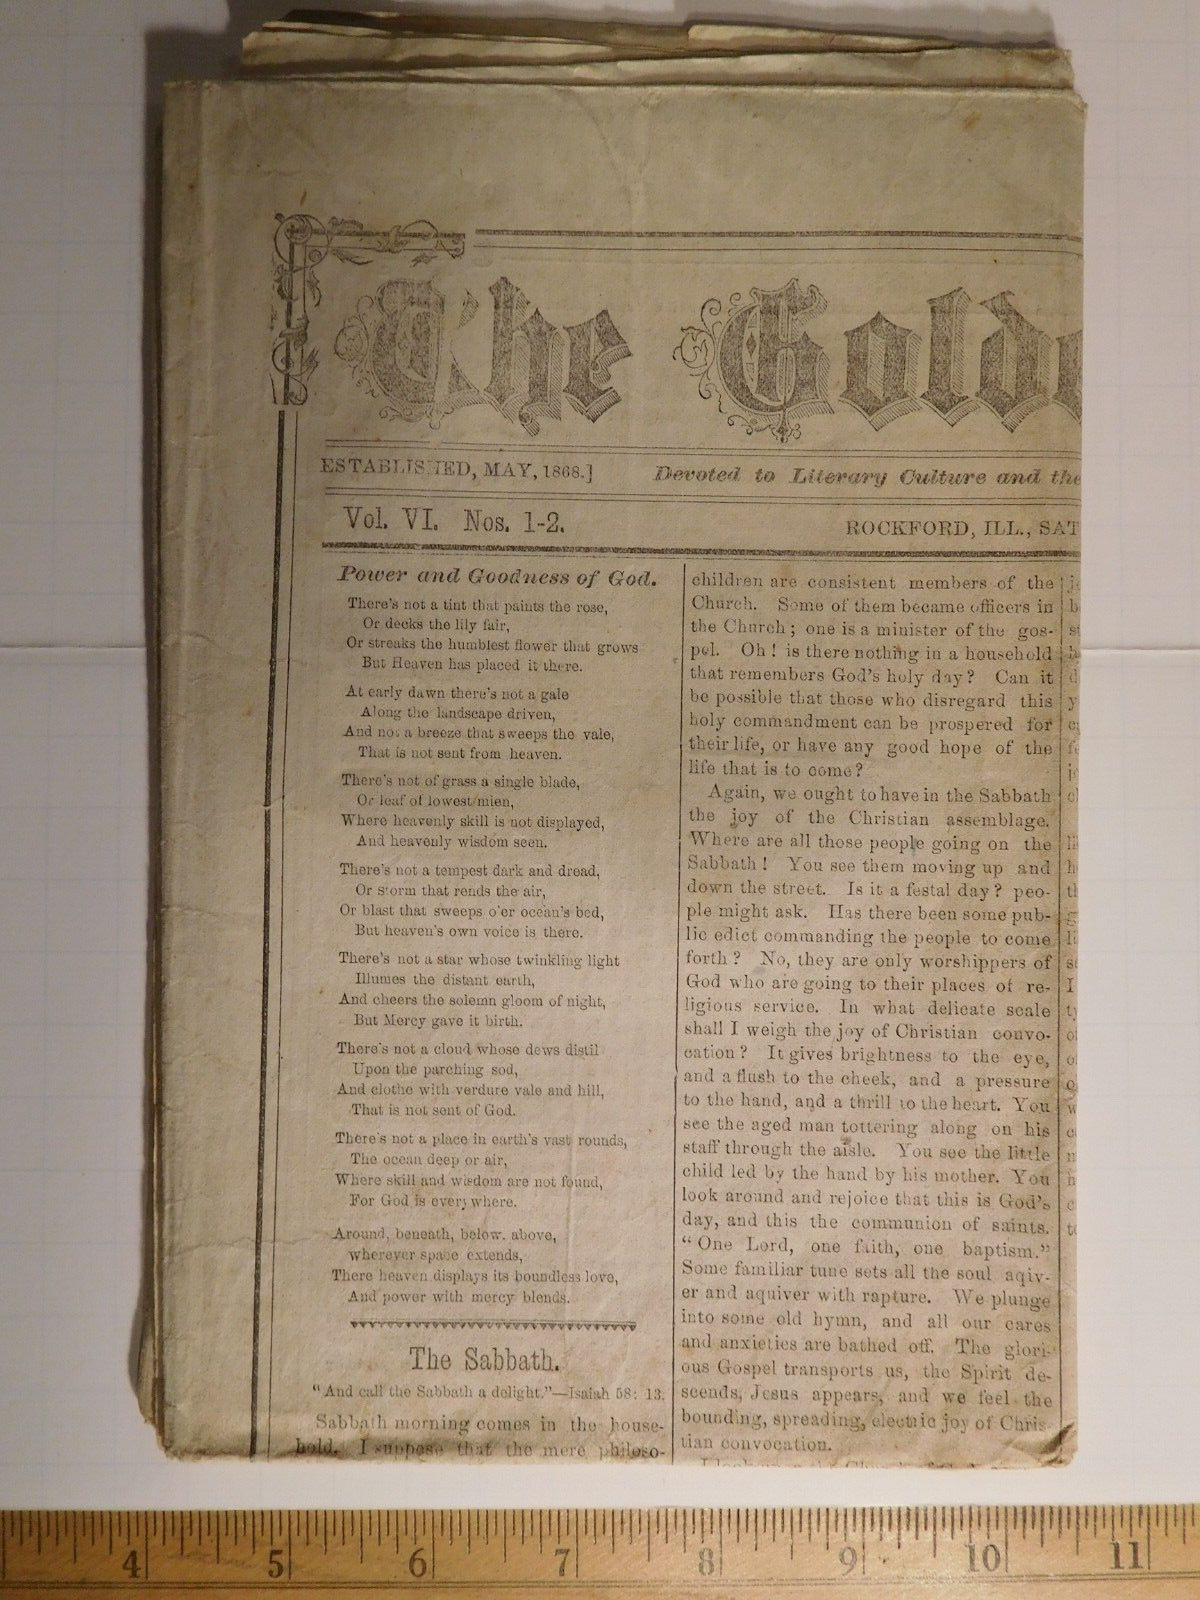 Amazing Rockford, Illinois Antique May 10, 1873 Newspaper The Golden Censer